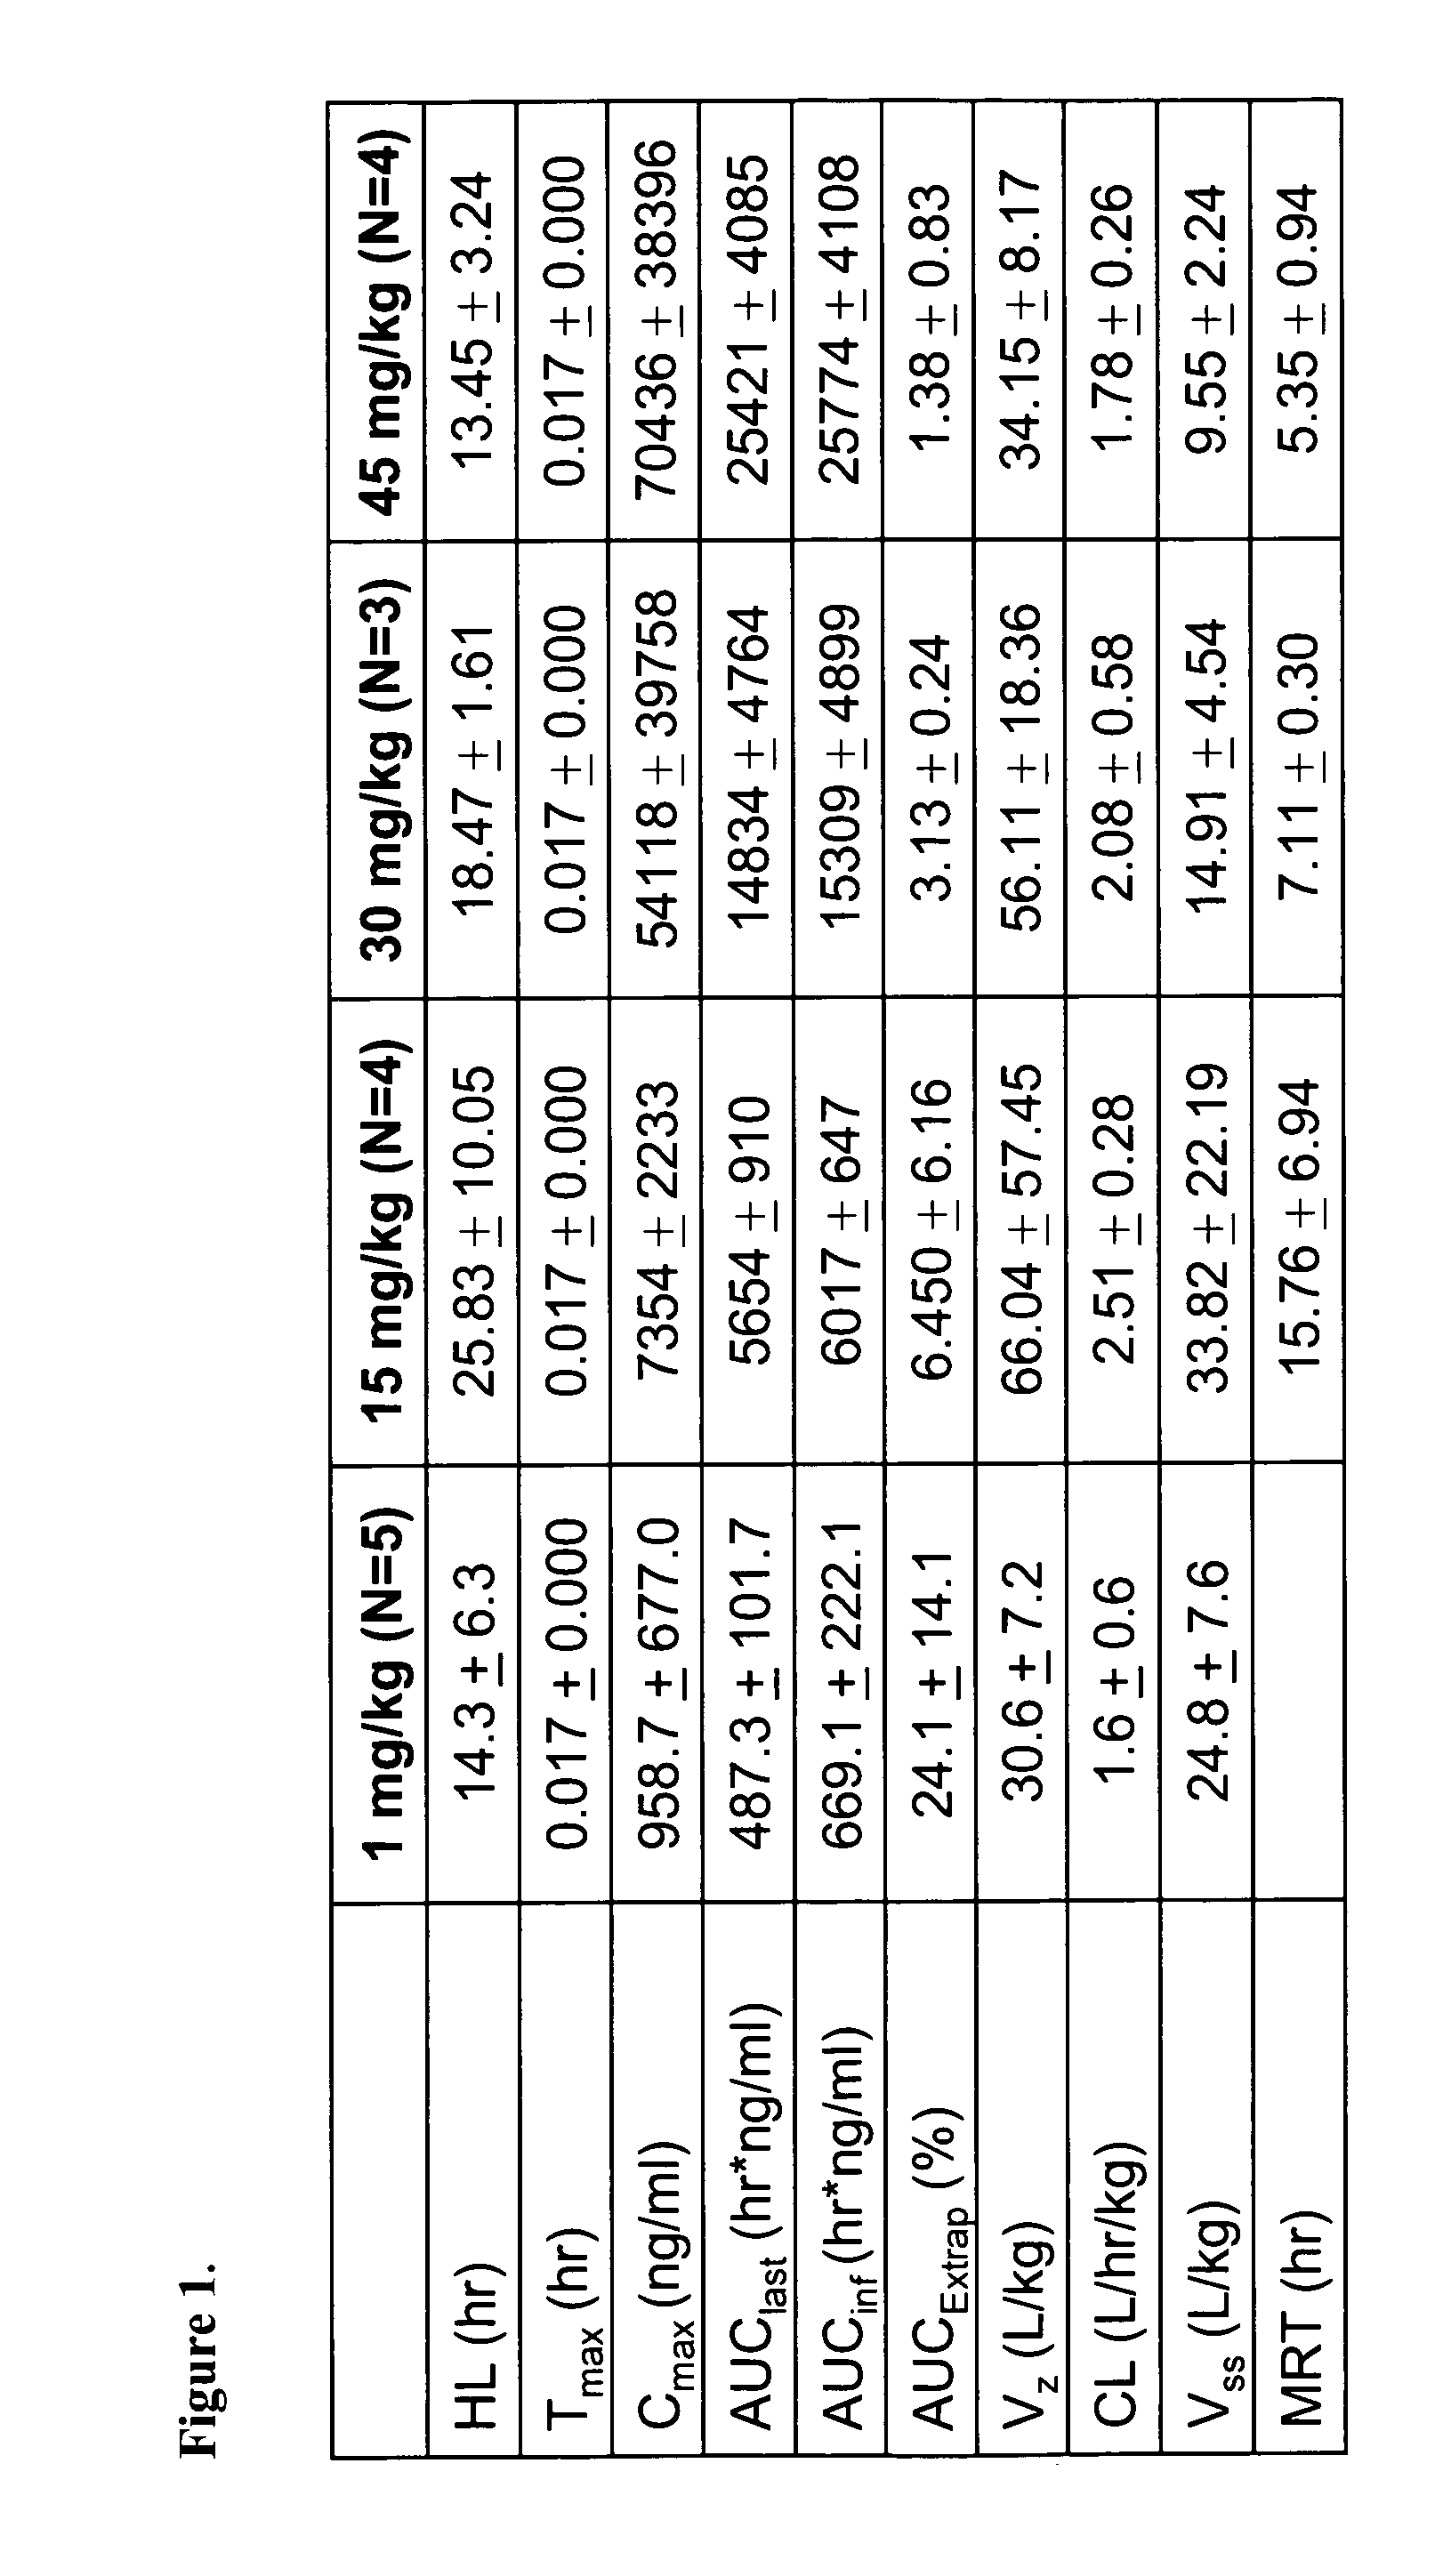 Nanoparticle comprising rapamycin and albumin as anticancer agent